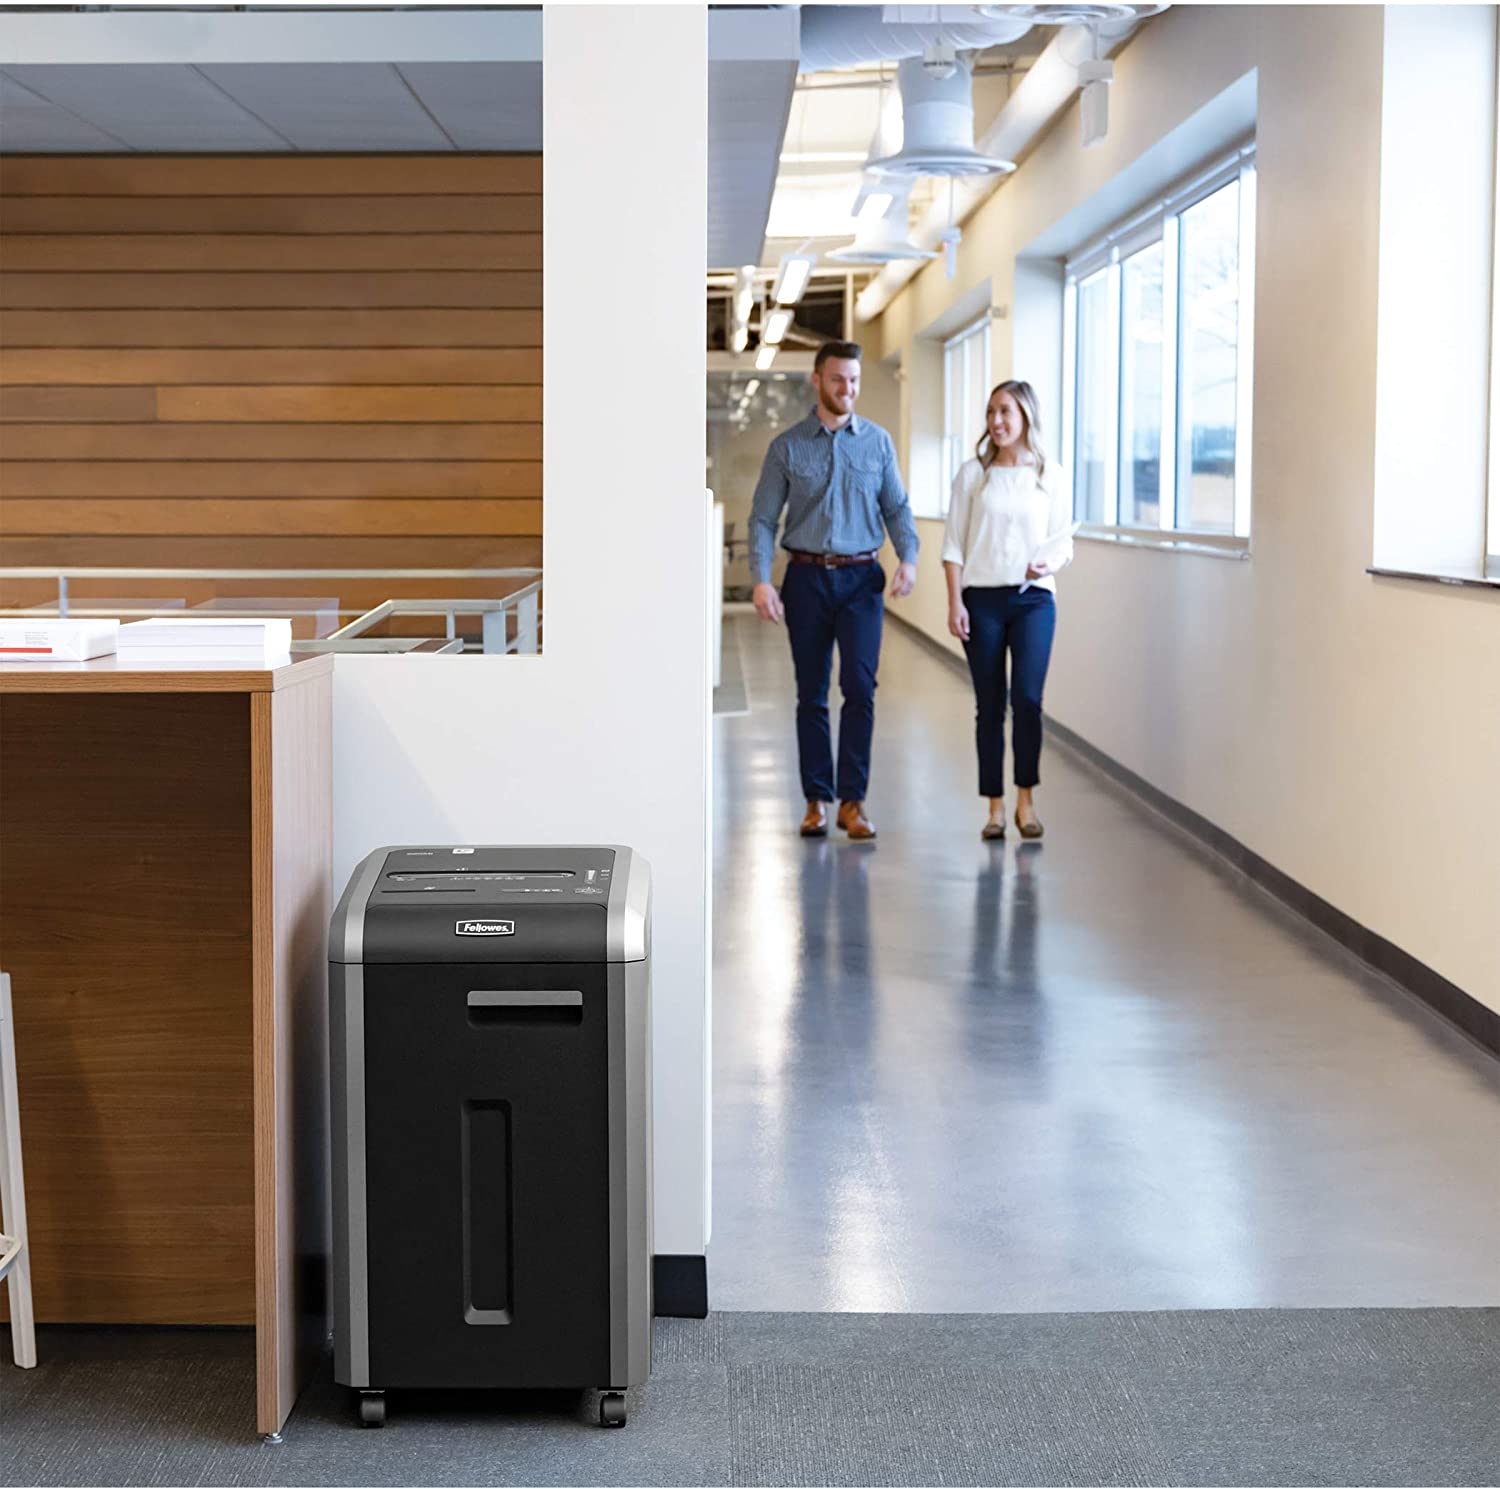 The image of Fellowes Powershred 225i Strip Cut Shredder in Office